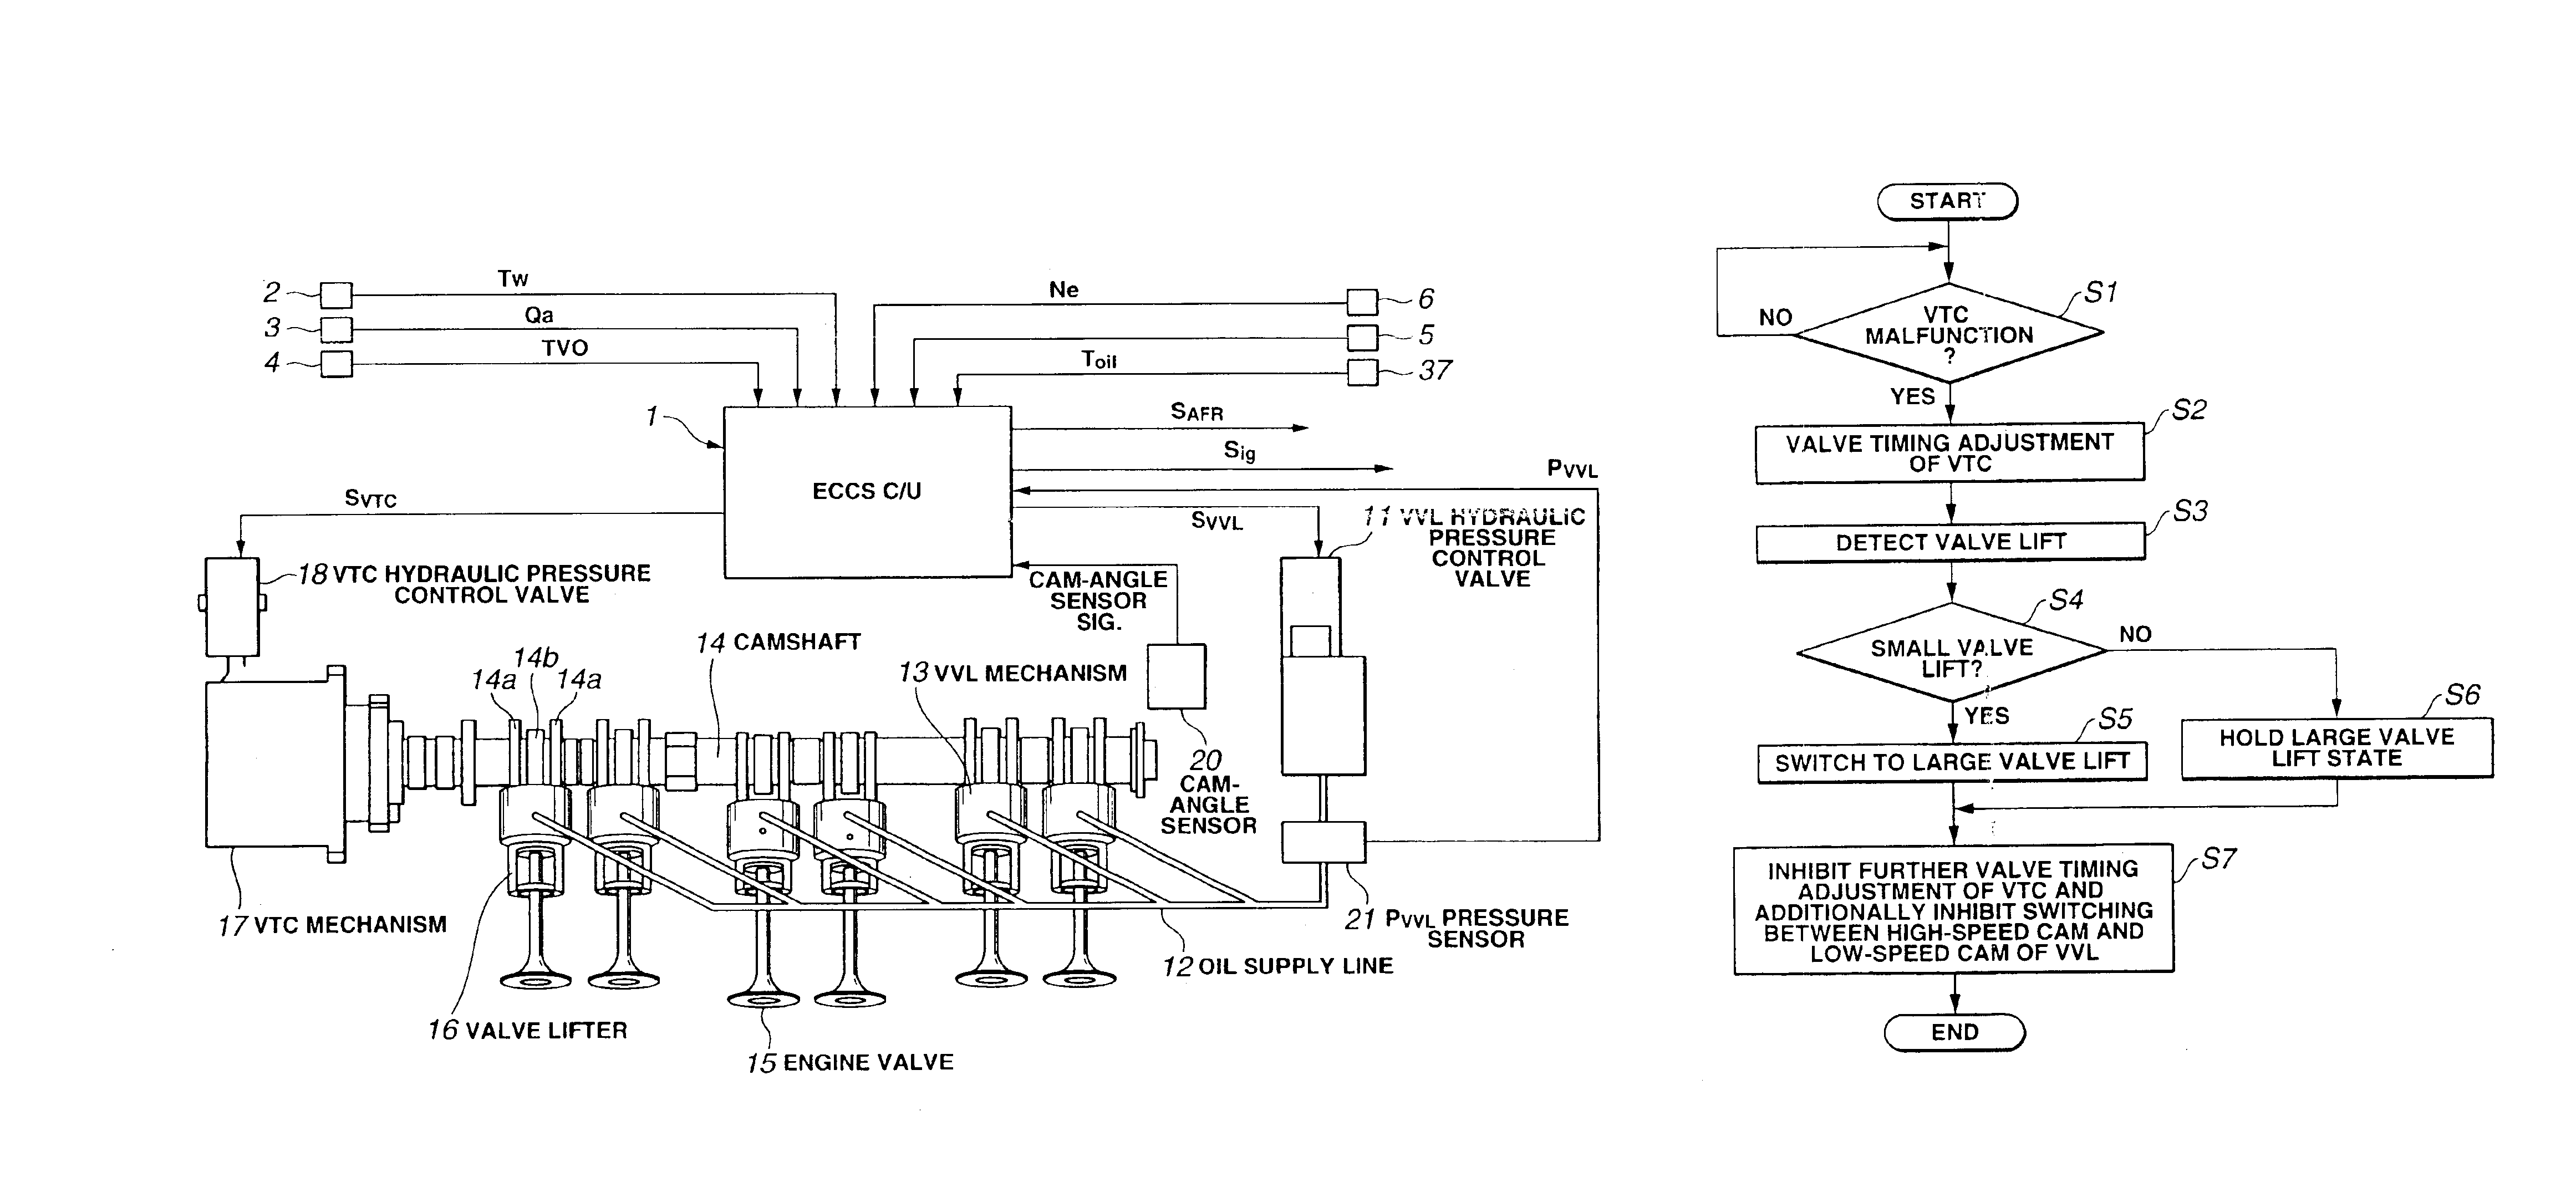 Variable valve operating system for internal combustion engine